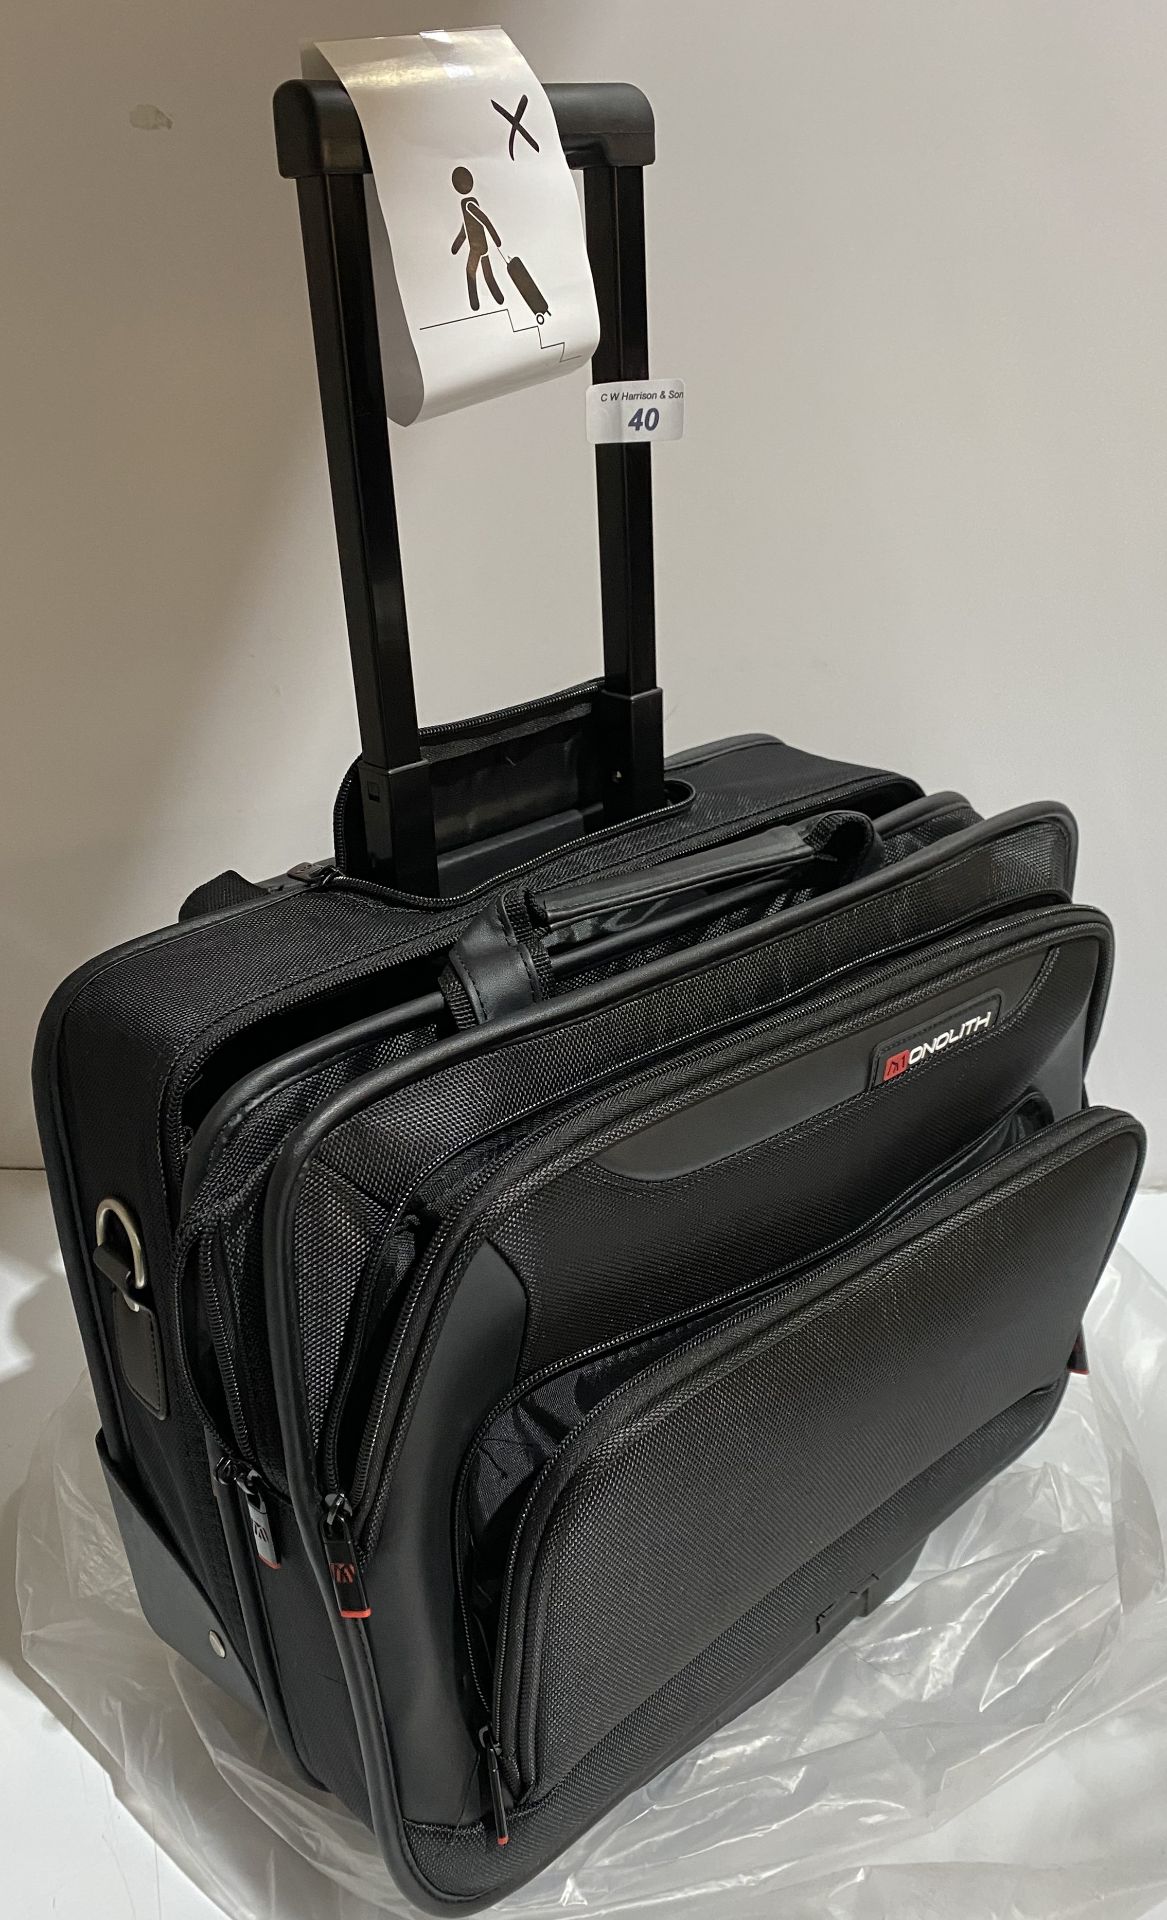 1 Monolith wheeled laptop flight bag with shoulder strap (new without tags)